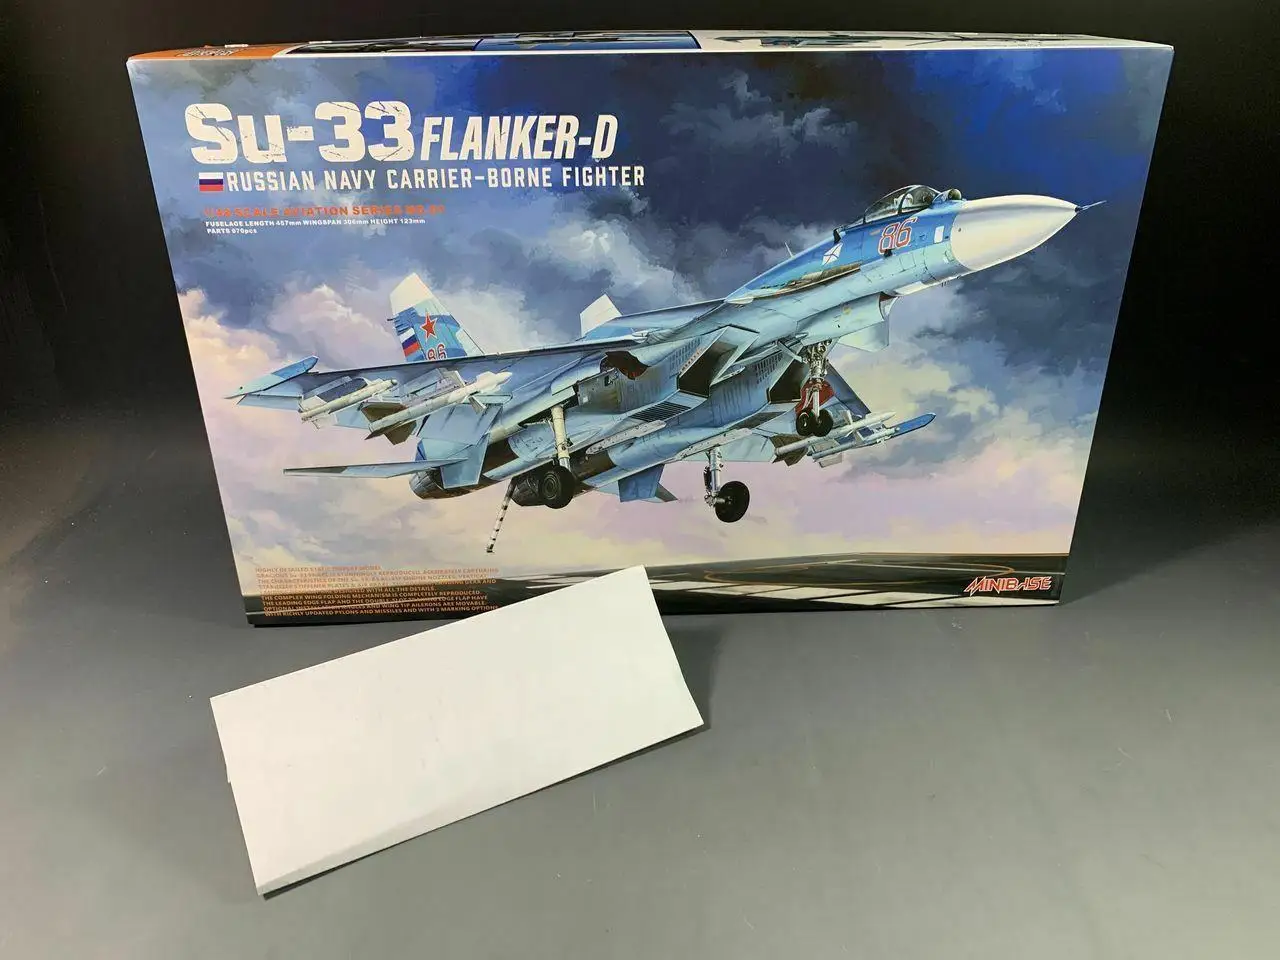 

MINIBASE 8001 1/48 Su-33 Flanker- D Russian Navy Carrier-Borne Fighter Scale Model Kit